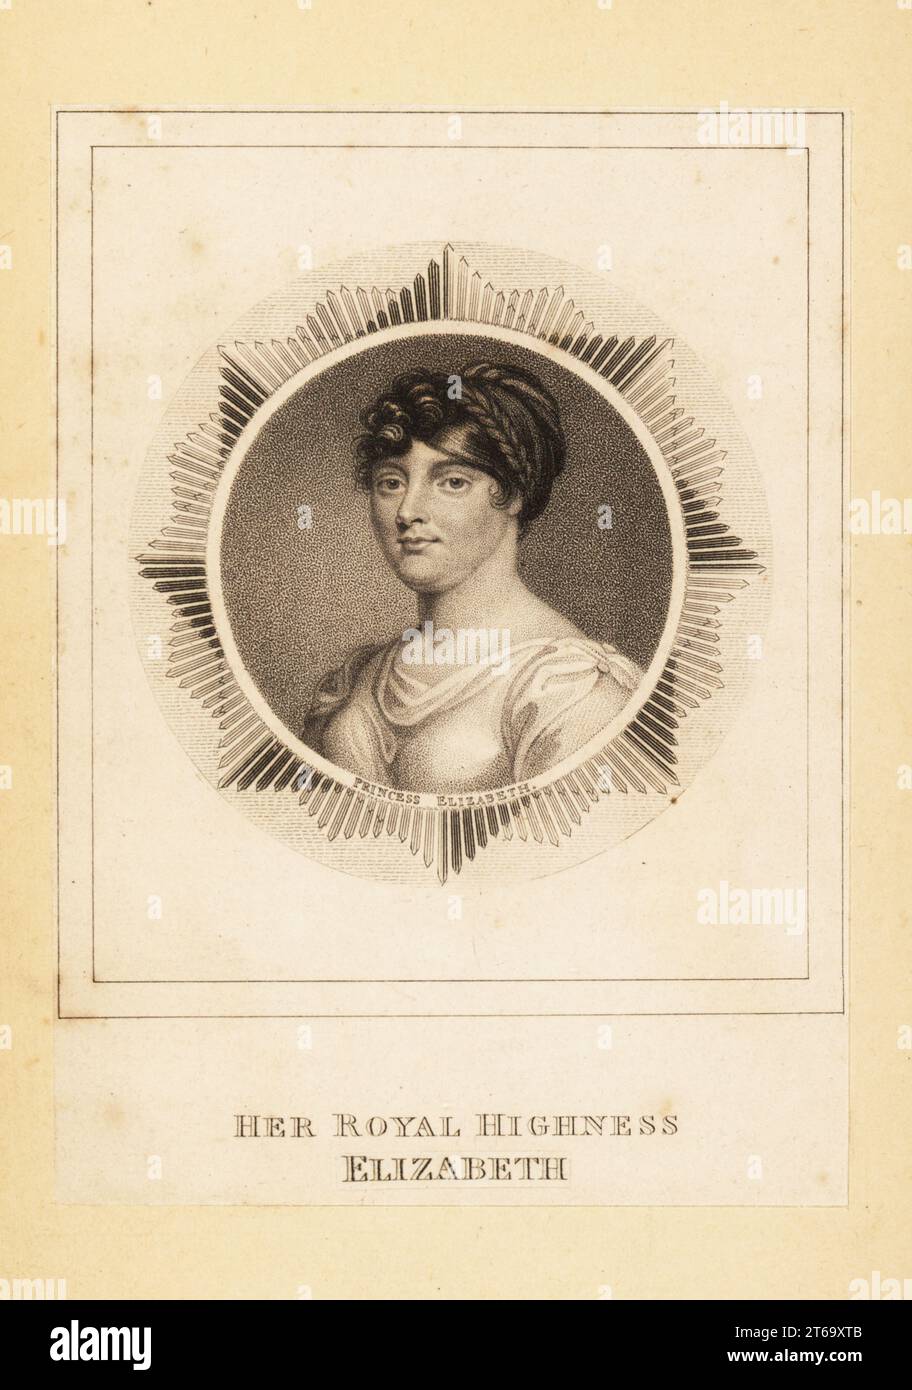 Portrait of Princess Elizabeth of England, in her 30s, 1770-1840, third daughter of mad king George III and Charlotte of Mecklenburg-Strelitz. Later, by marriage, Landgravine of Hesse-Homburg. With hair up in braids, white robe, within a circular frame, decorated border. Her Royal Highness Elizabeth. Copperplate engraving from unknown publication, London, 1800s. Stock Photo